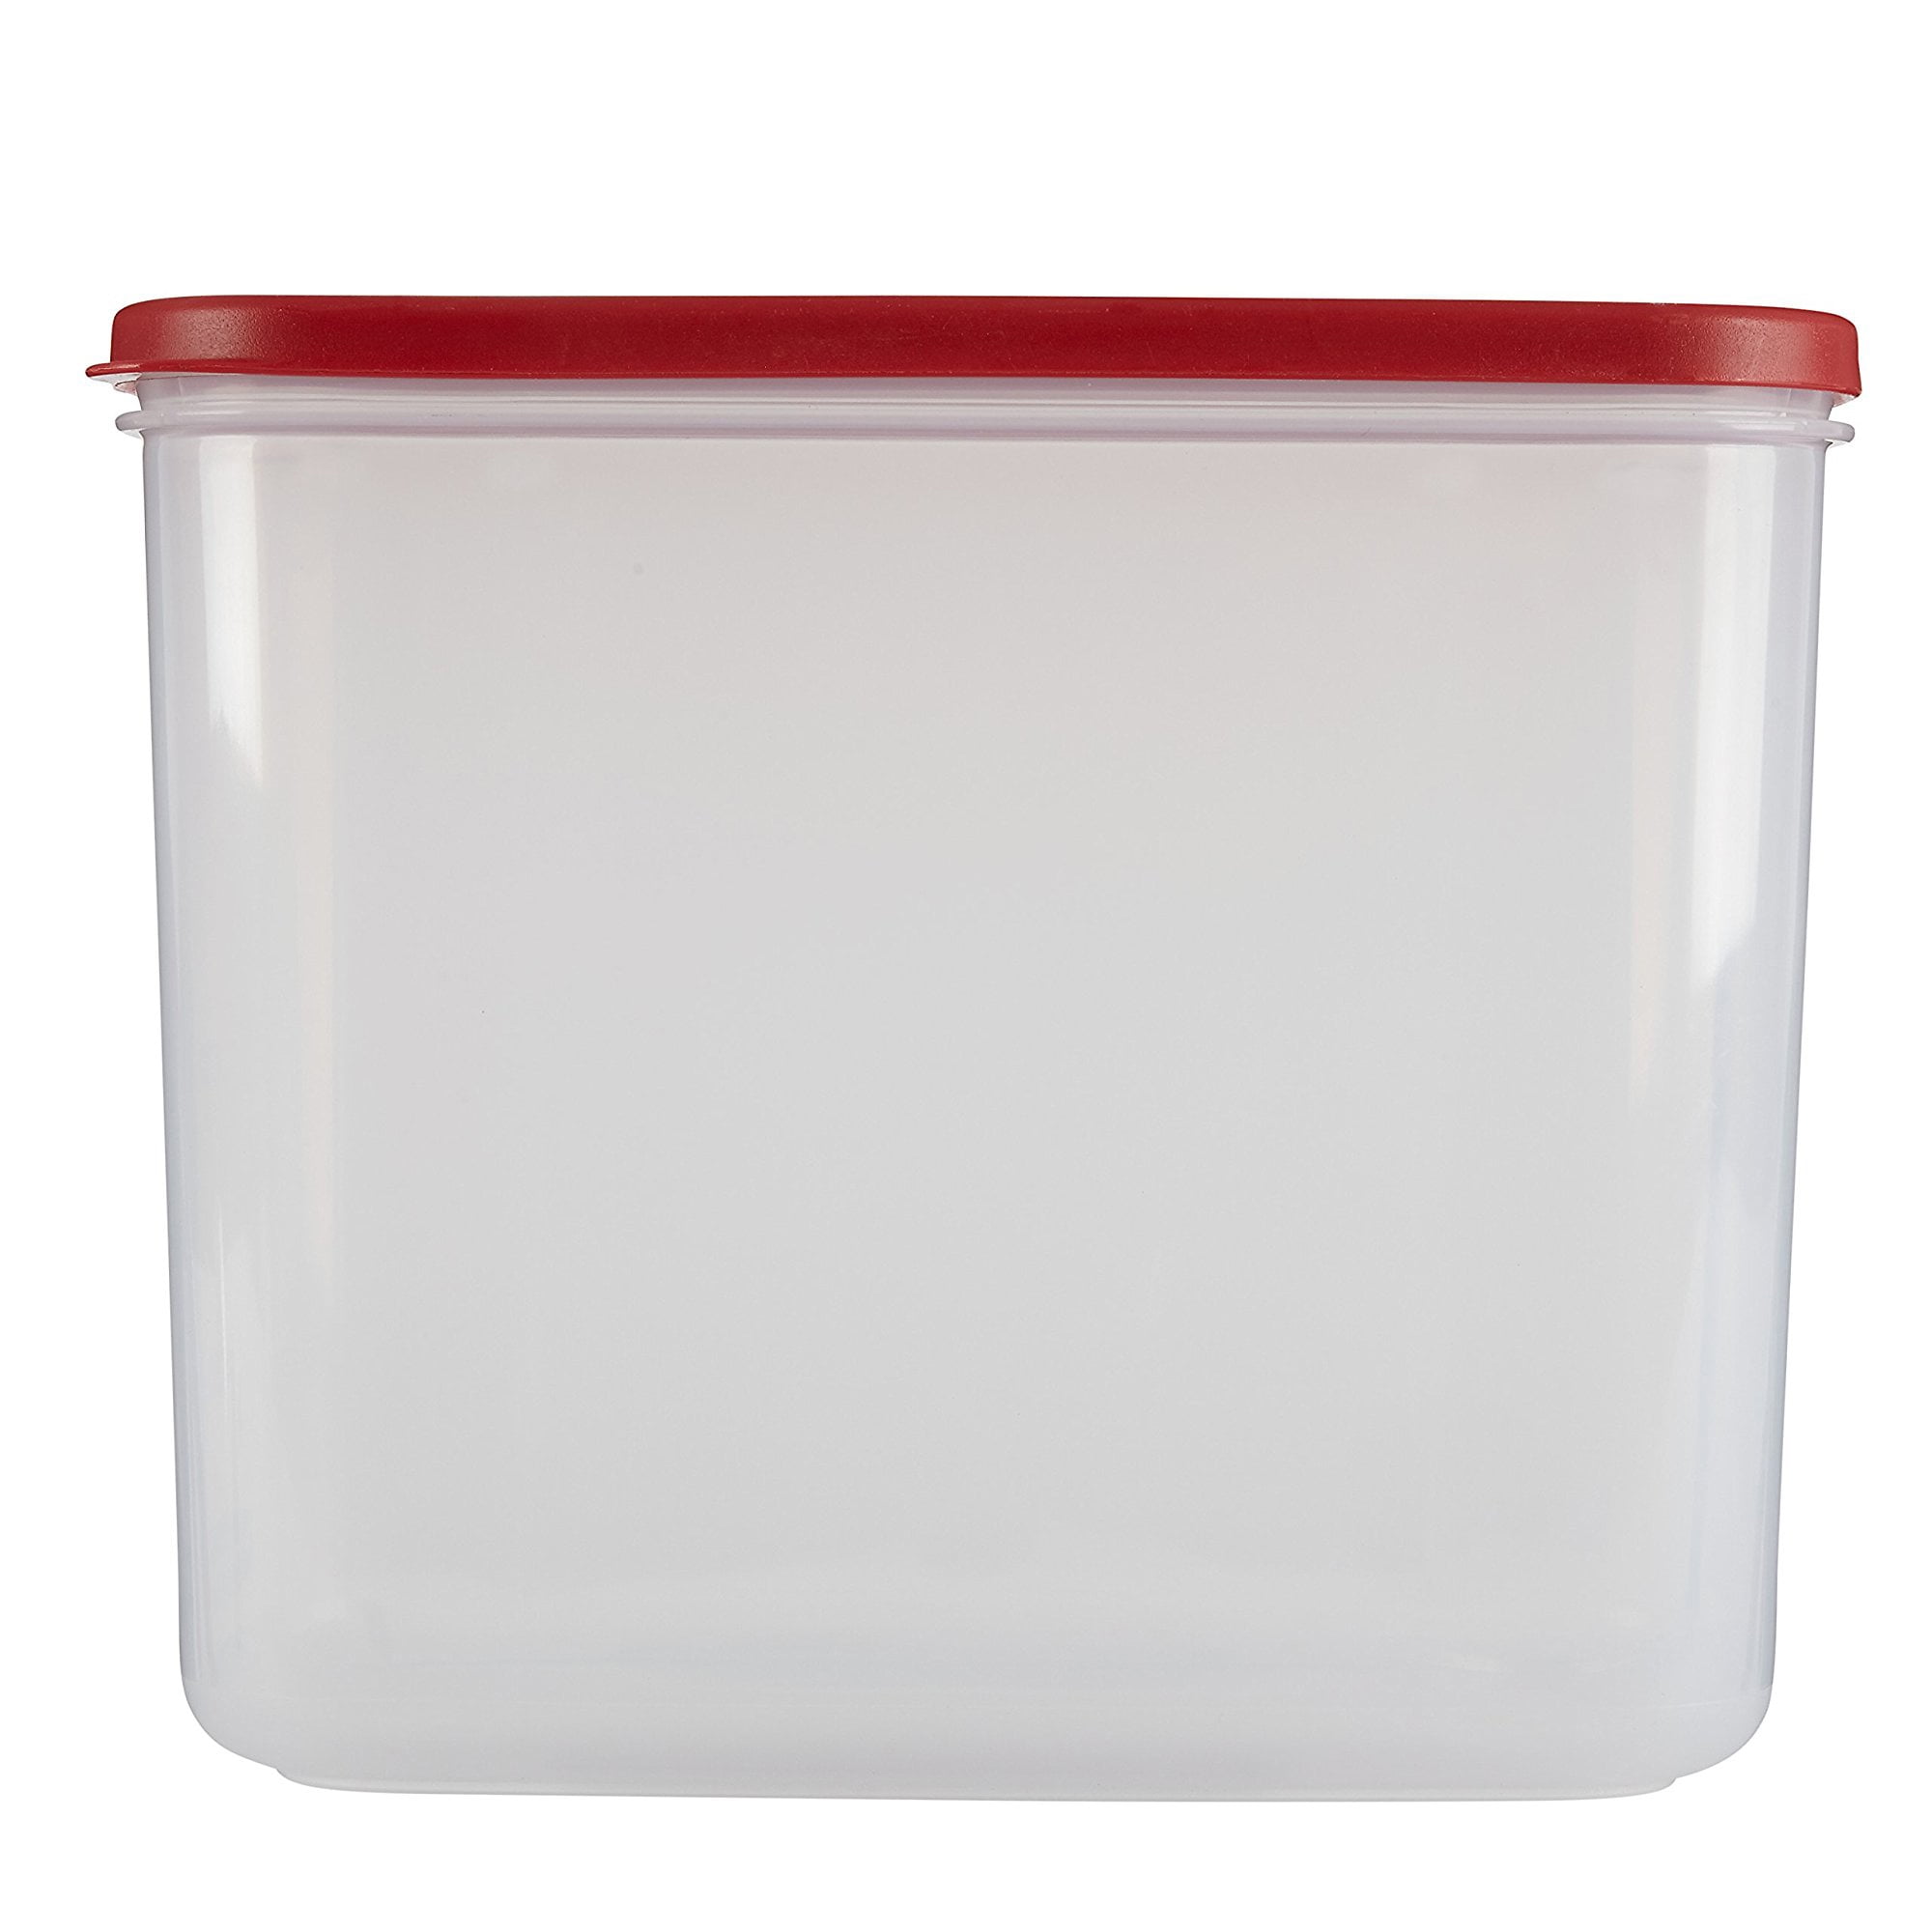 Rubbermaid 16 cups Clear/Red Food Storage Container 1 pk - Yahoo